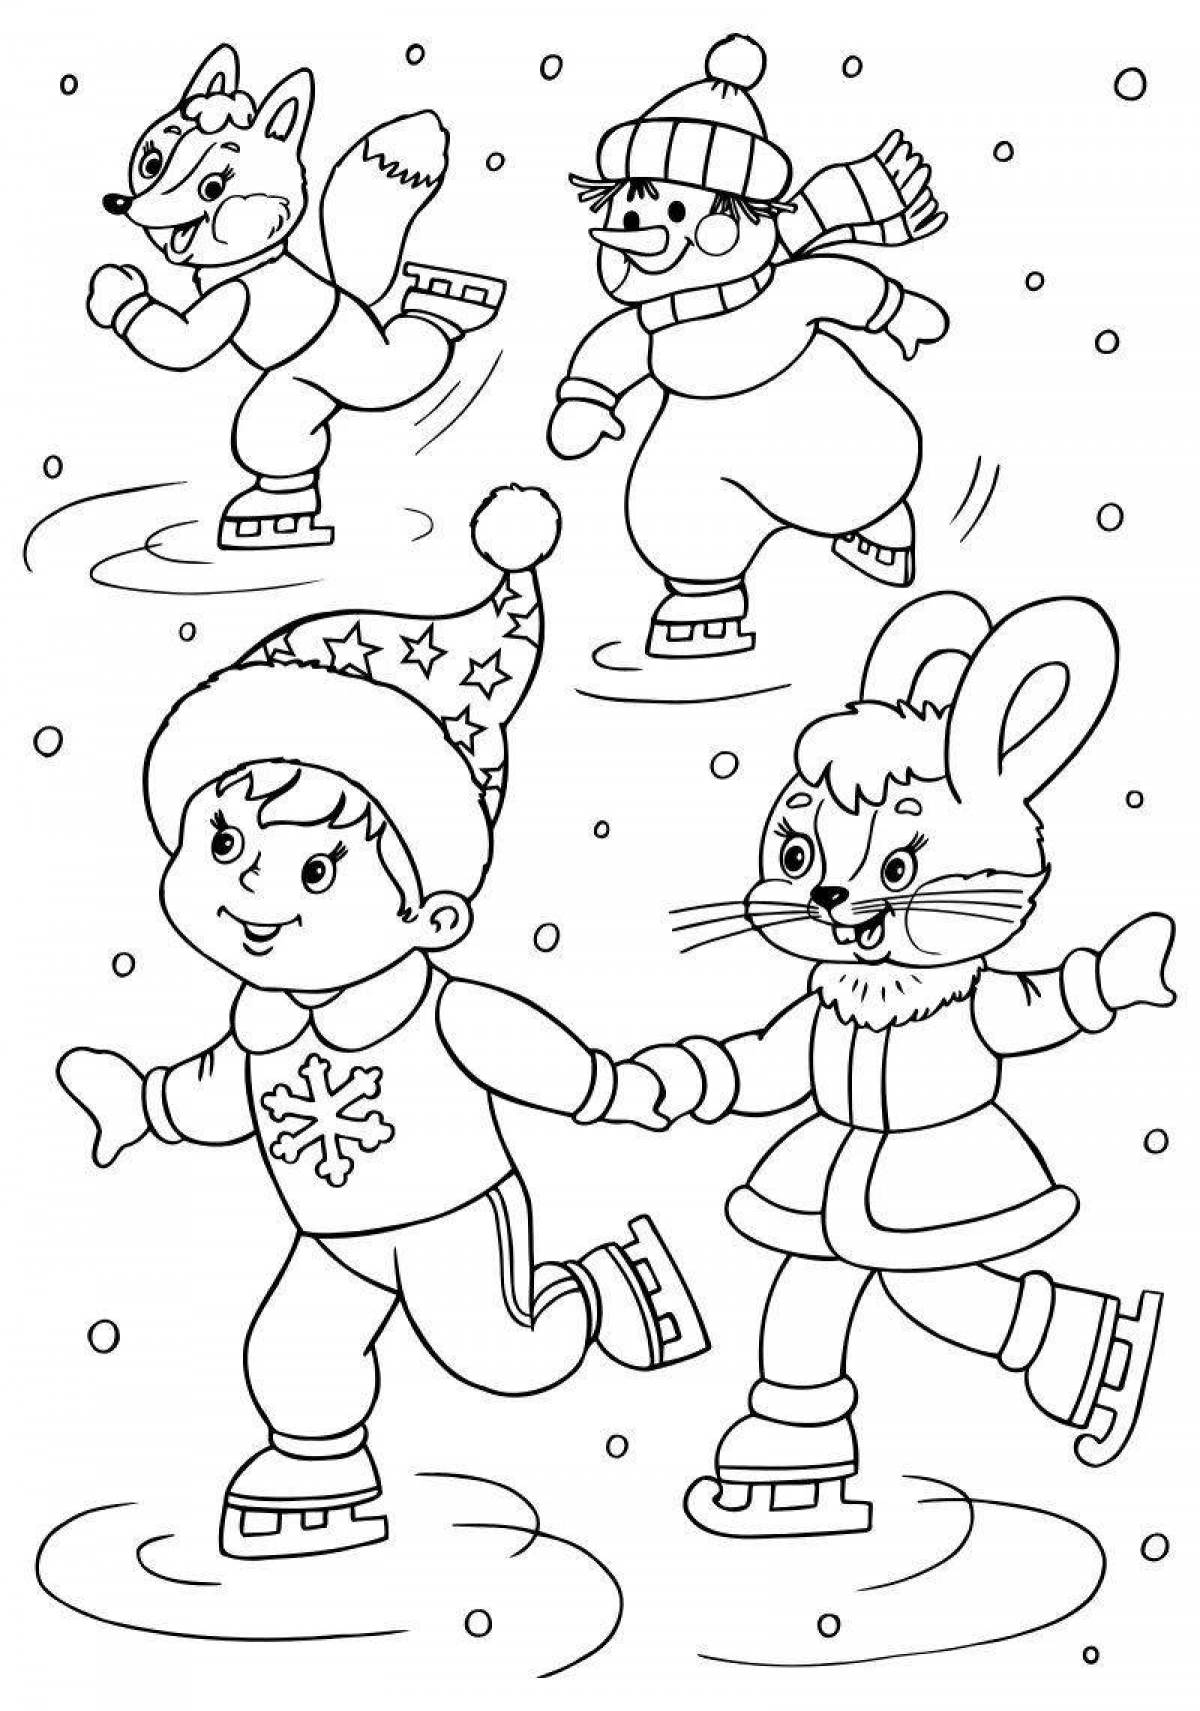 Exotic winter coloring book for kids 6-7 years old